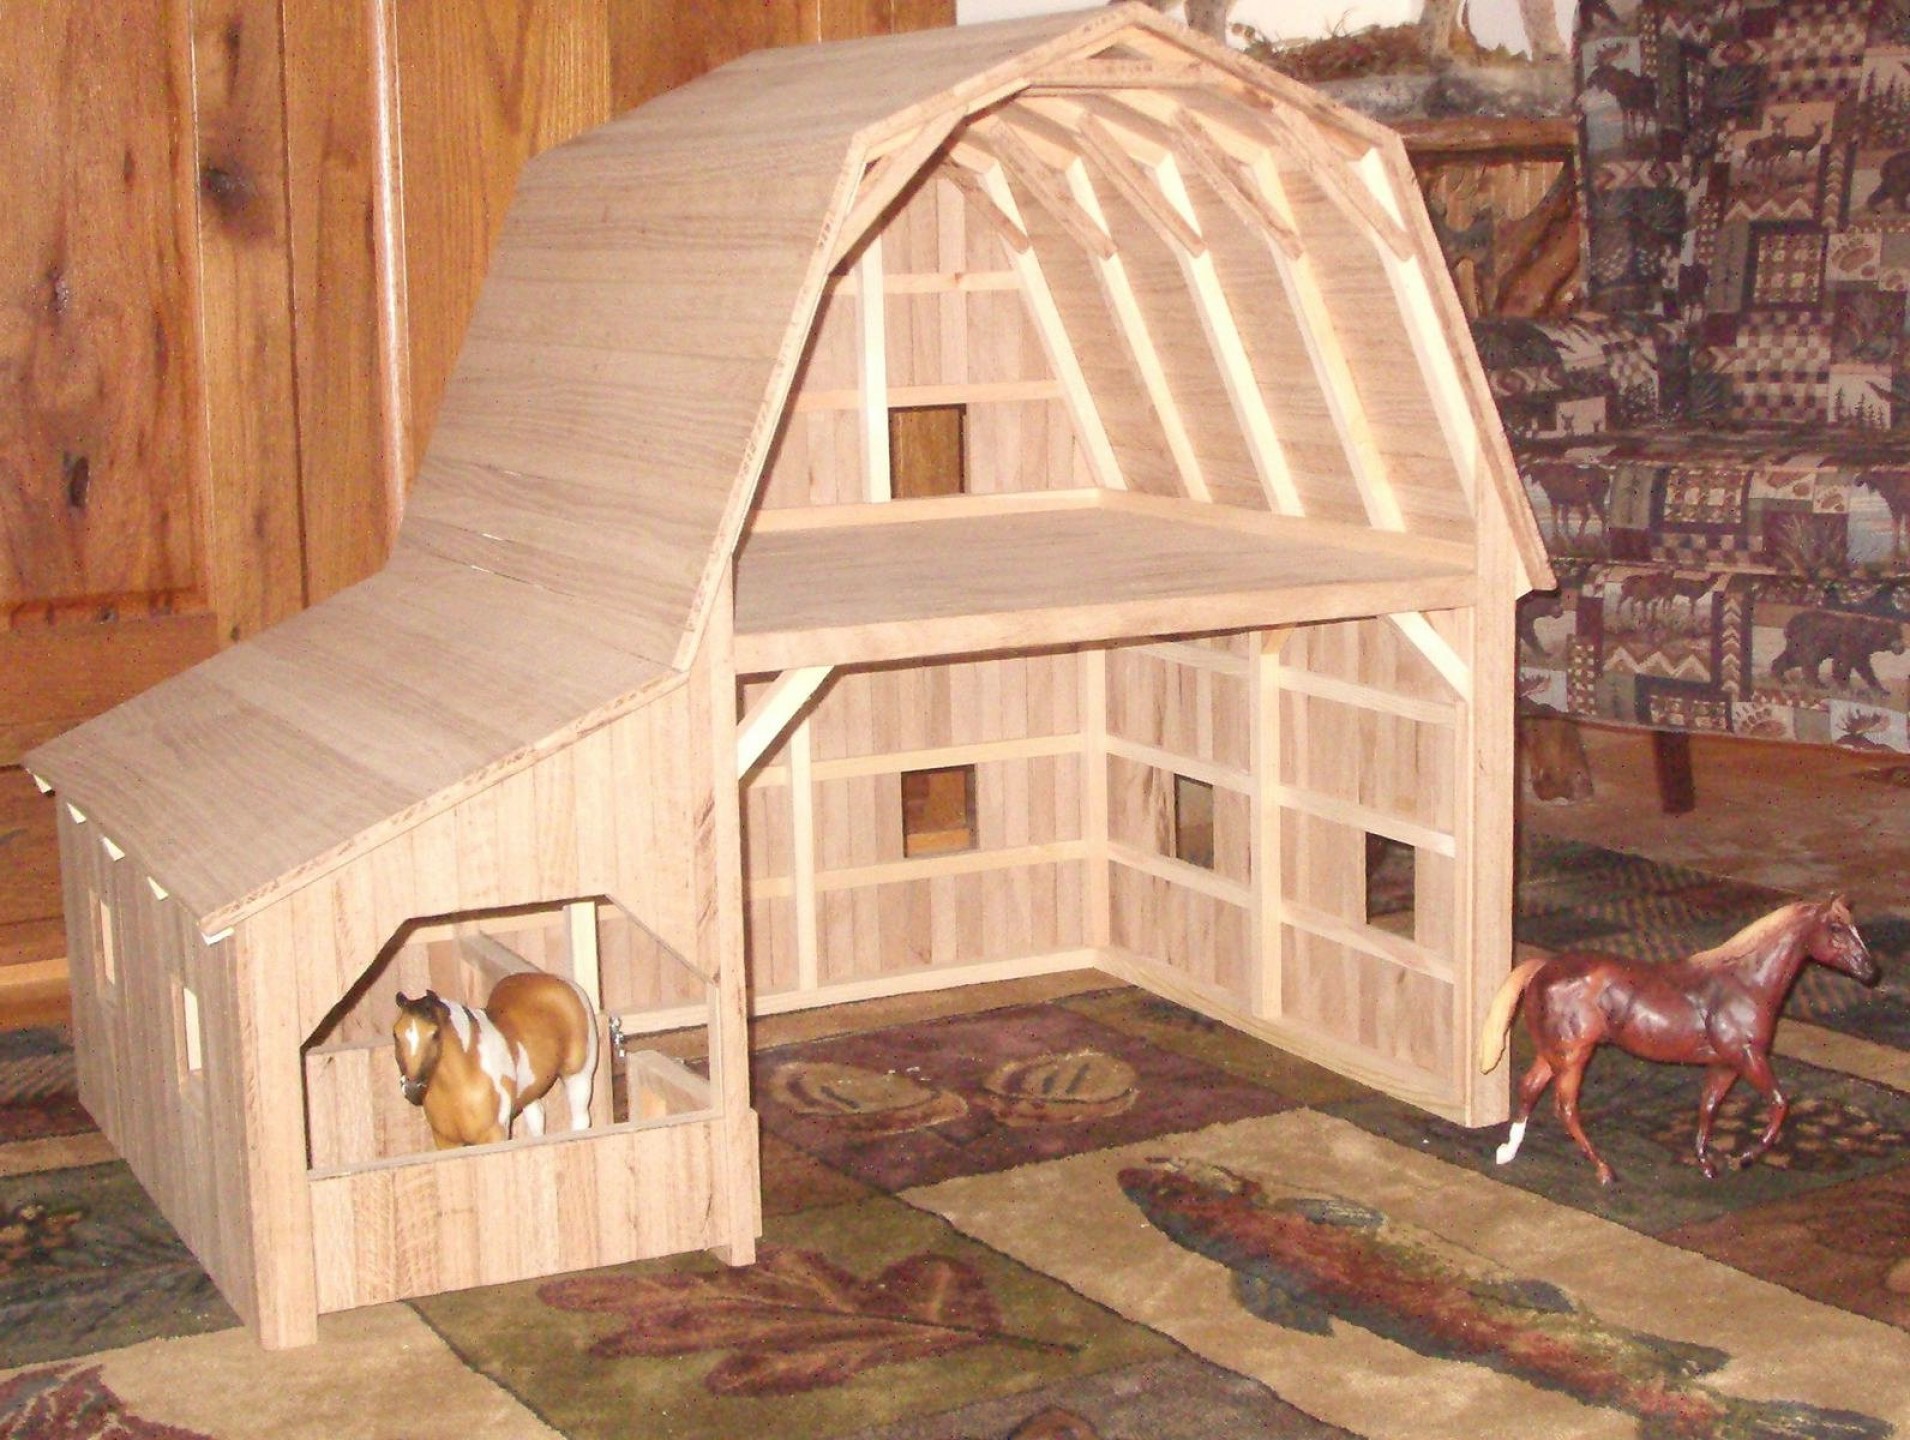 Beautiful Play Barns For Kids Toy Barn Wooden Home Design | ARDIAFM